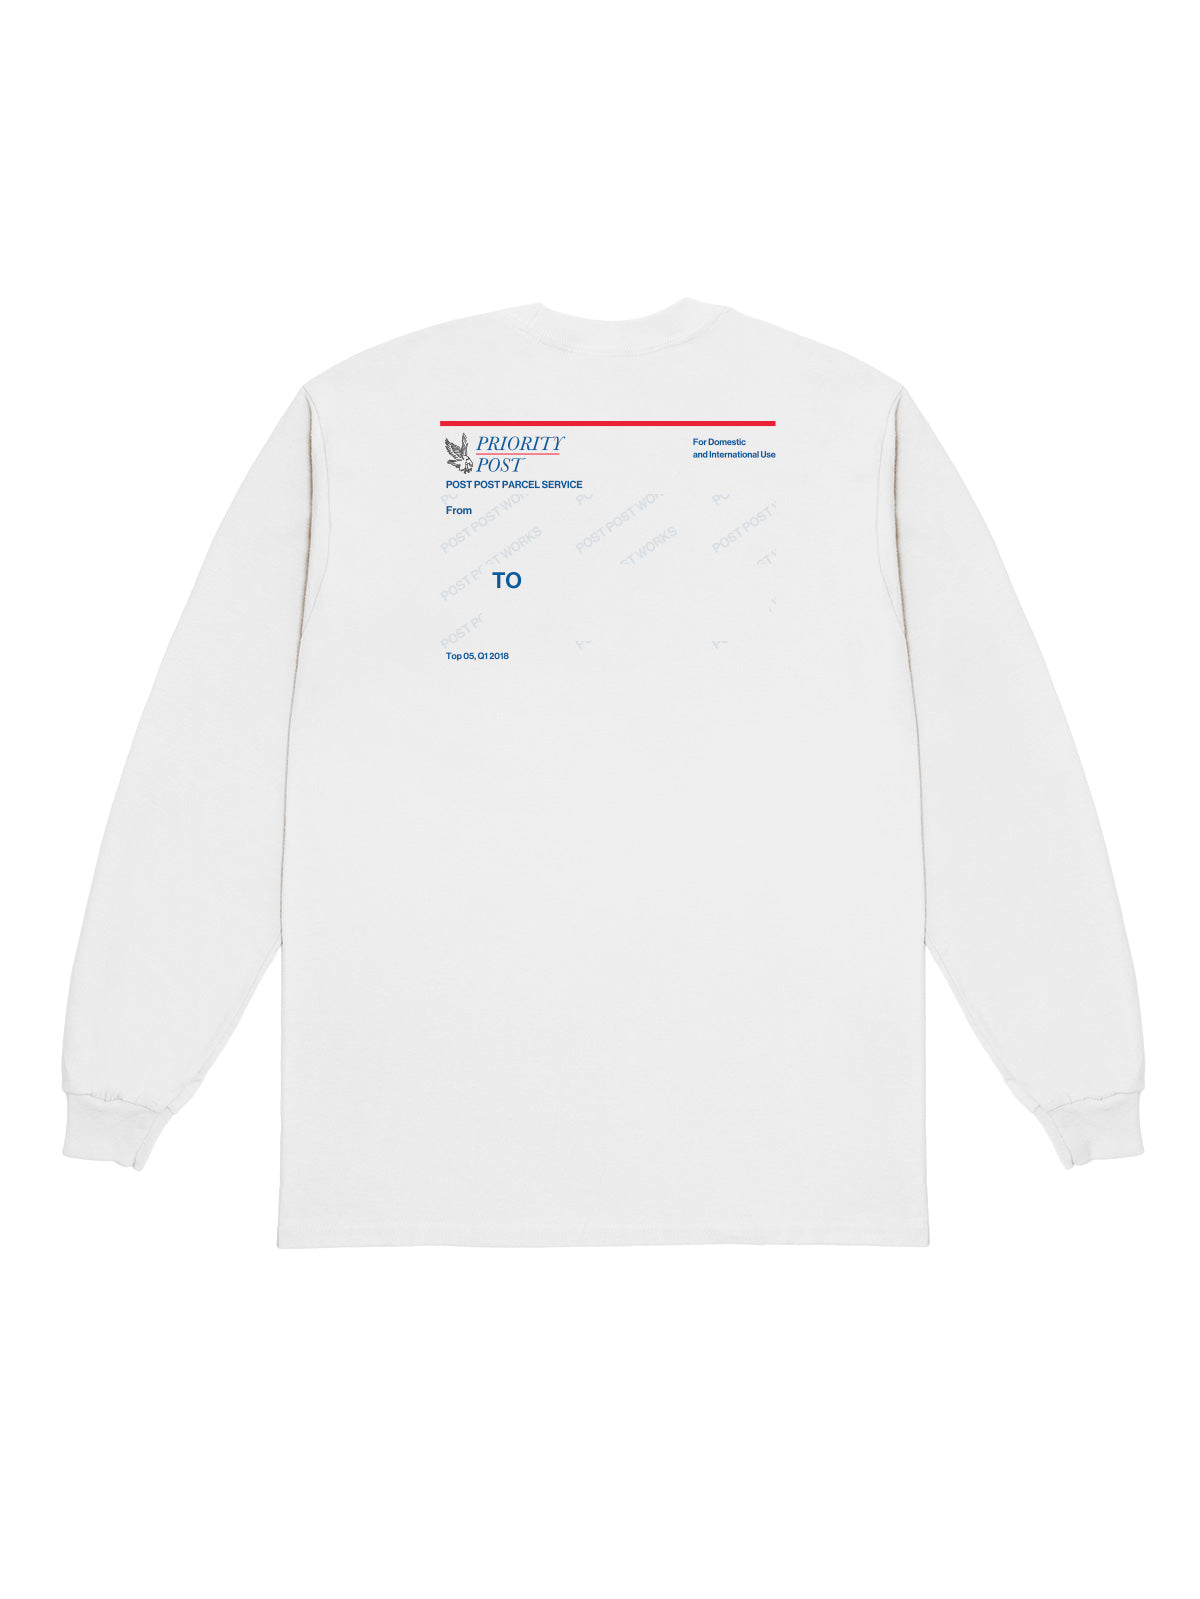 Post Post Parcel Service Tee, White